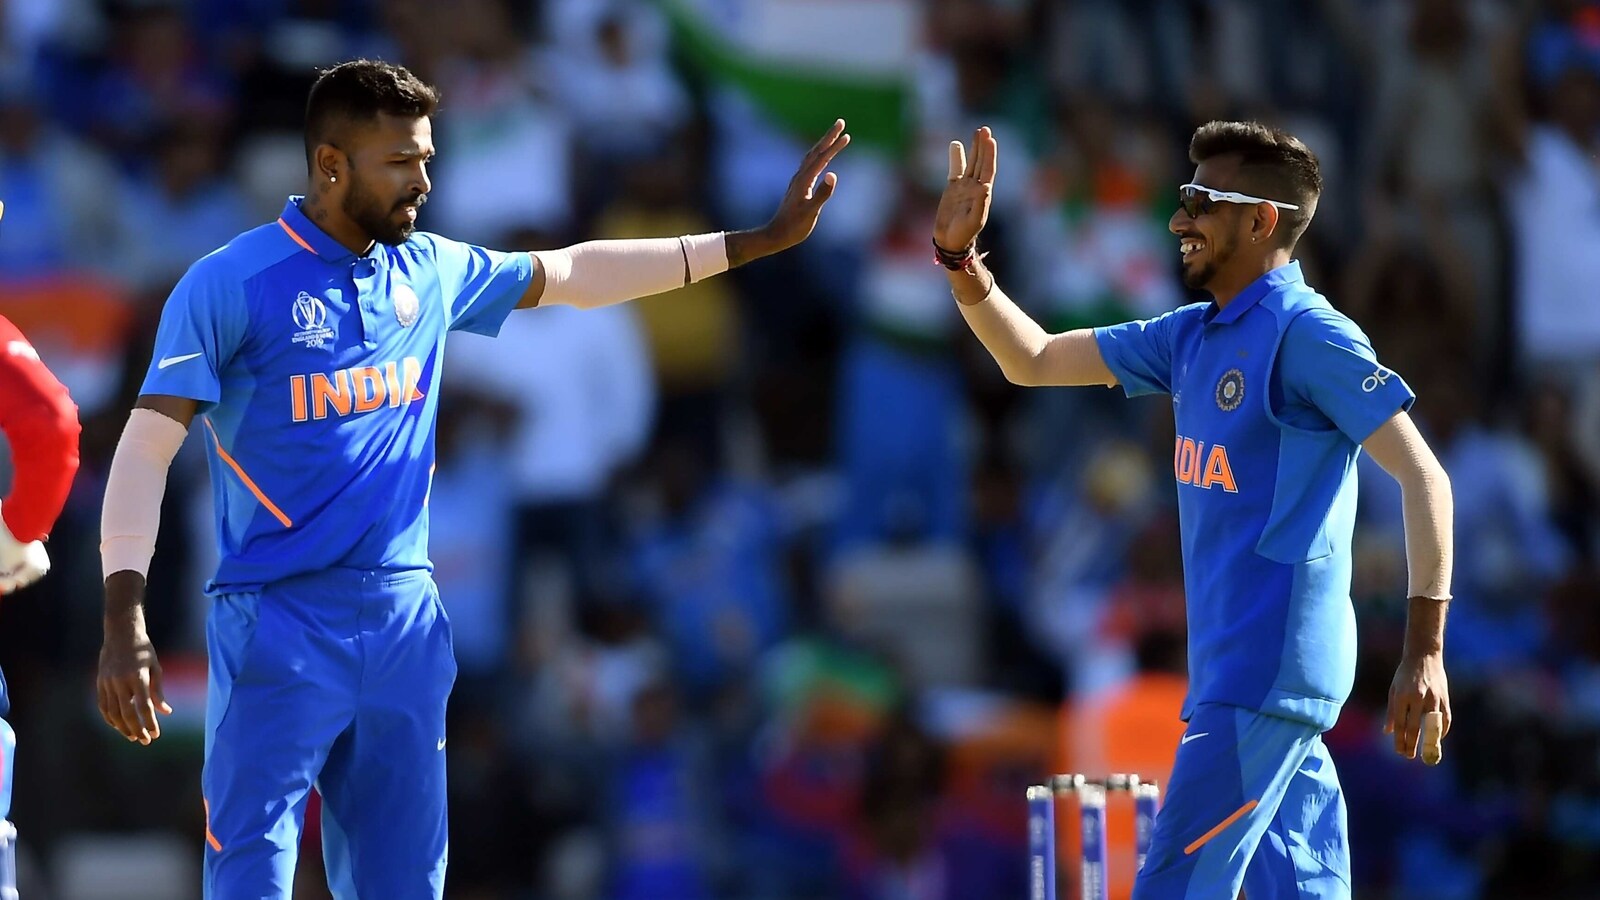 The two Team India T20 stars who need to improve their home game ahead of the World Cup